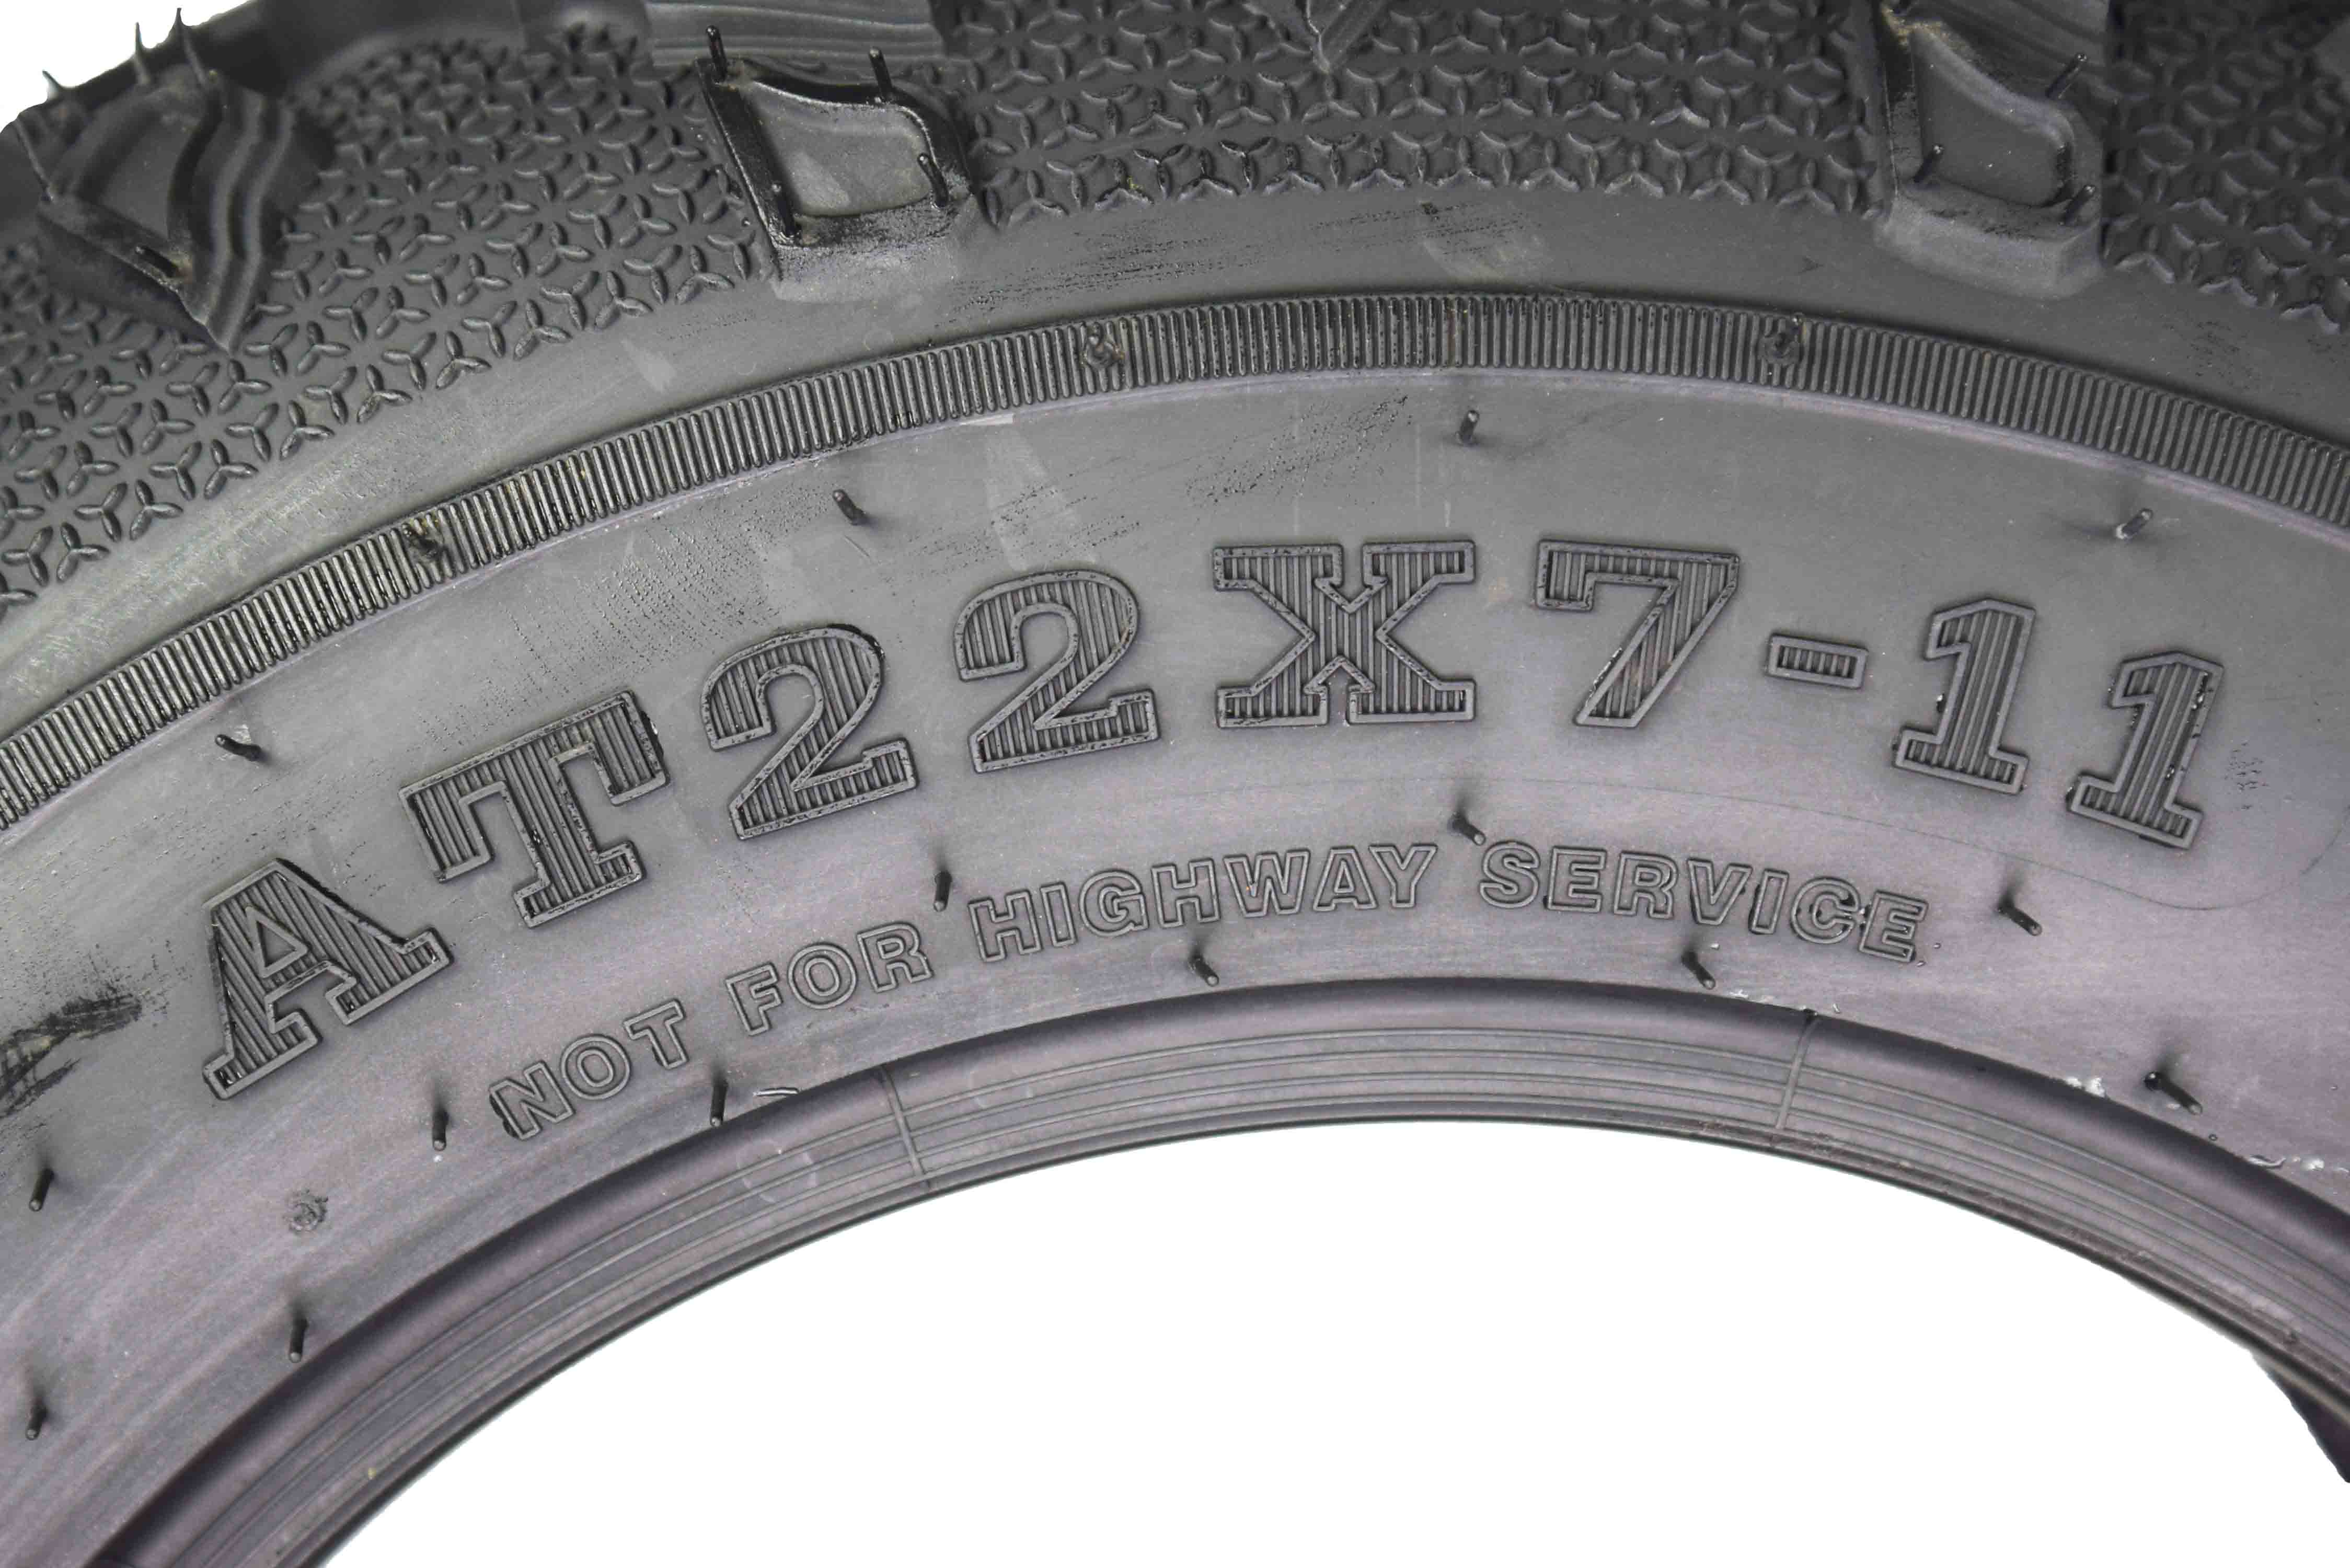 MASSFX-Grinder-22x7-11-Front-ATV-Tire-6-Ply-for-Soft-Hard-Pack-Ground-image-2